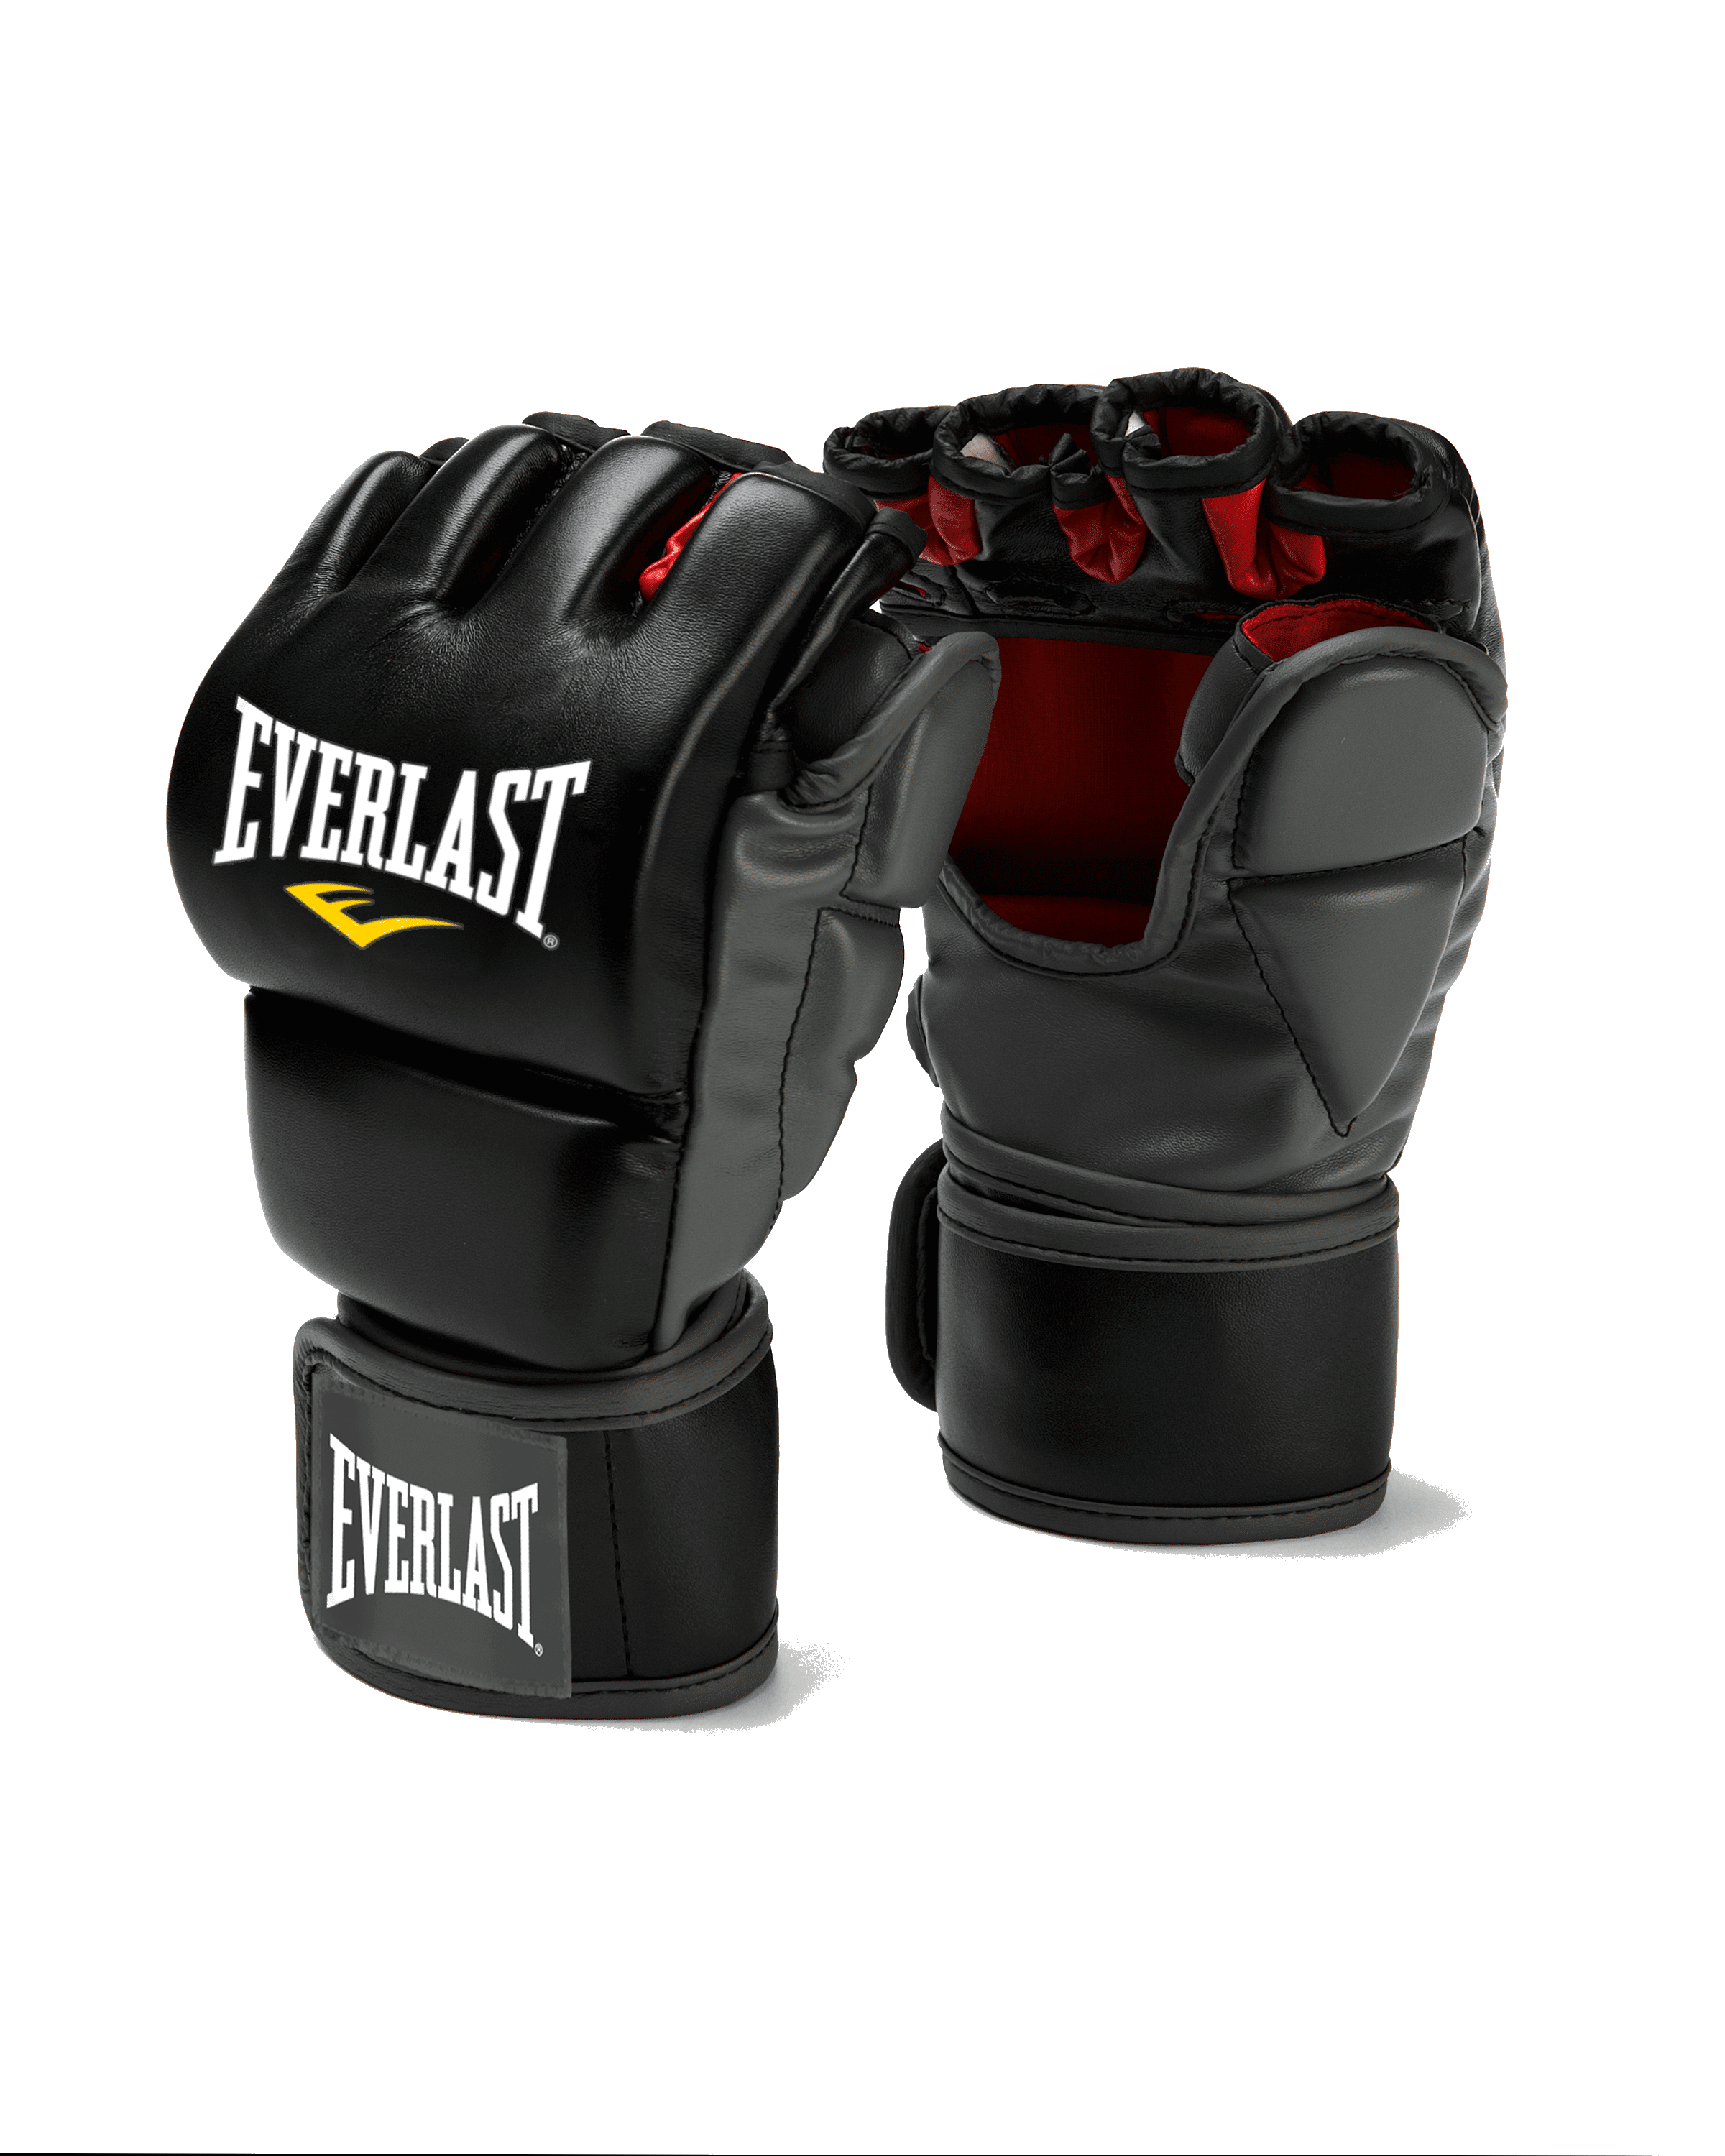 PRO STYLE TRAINING GLOVES S/M Details about   WOMEN'S EVERLAST MMA ADVANCED 4 Oz 